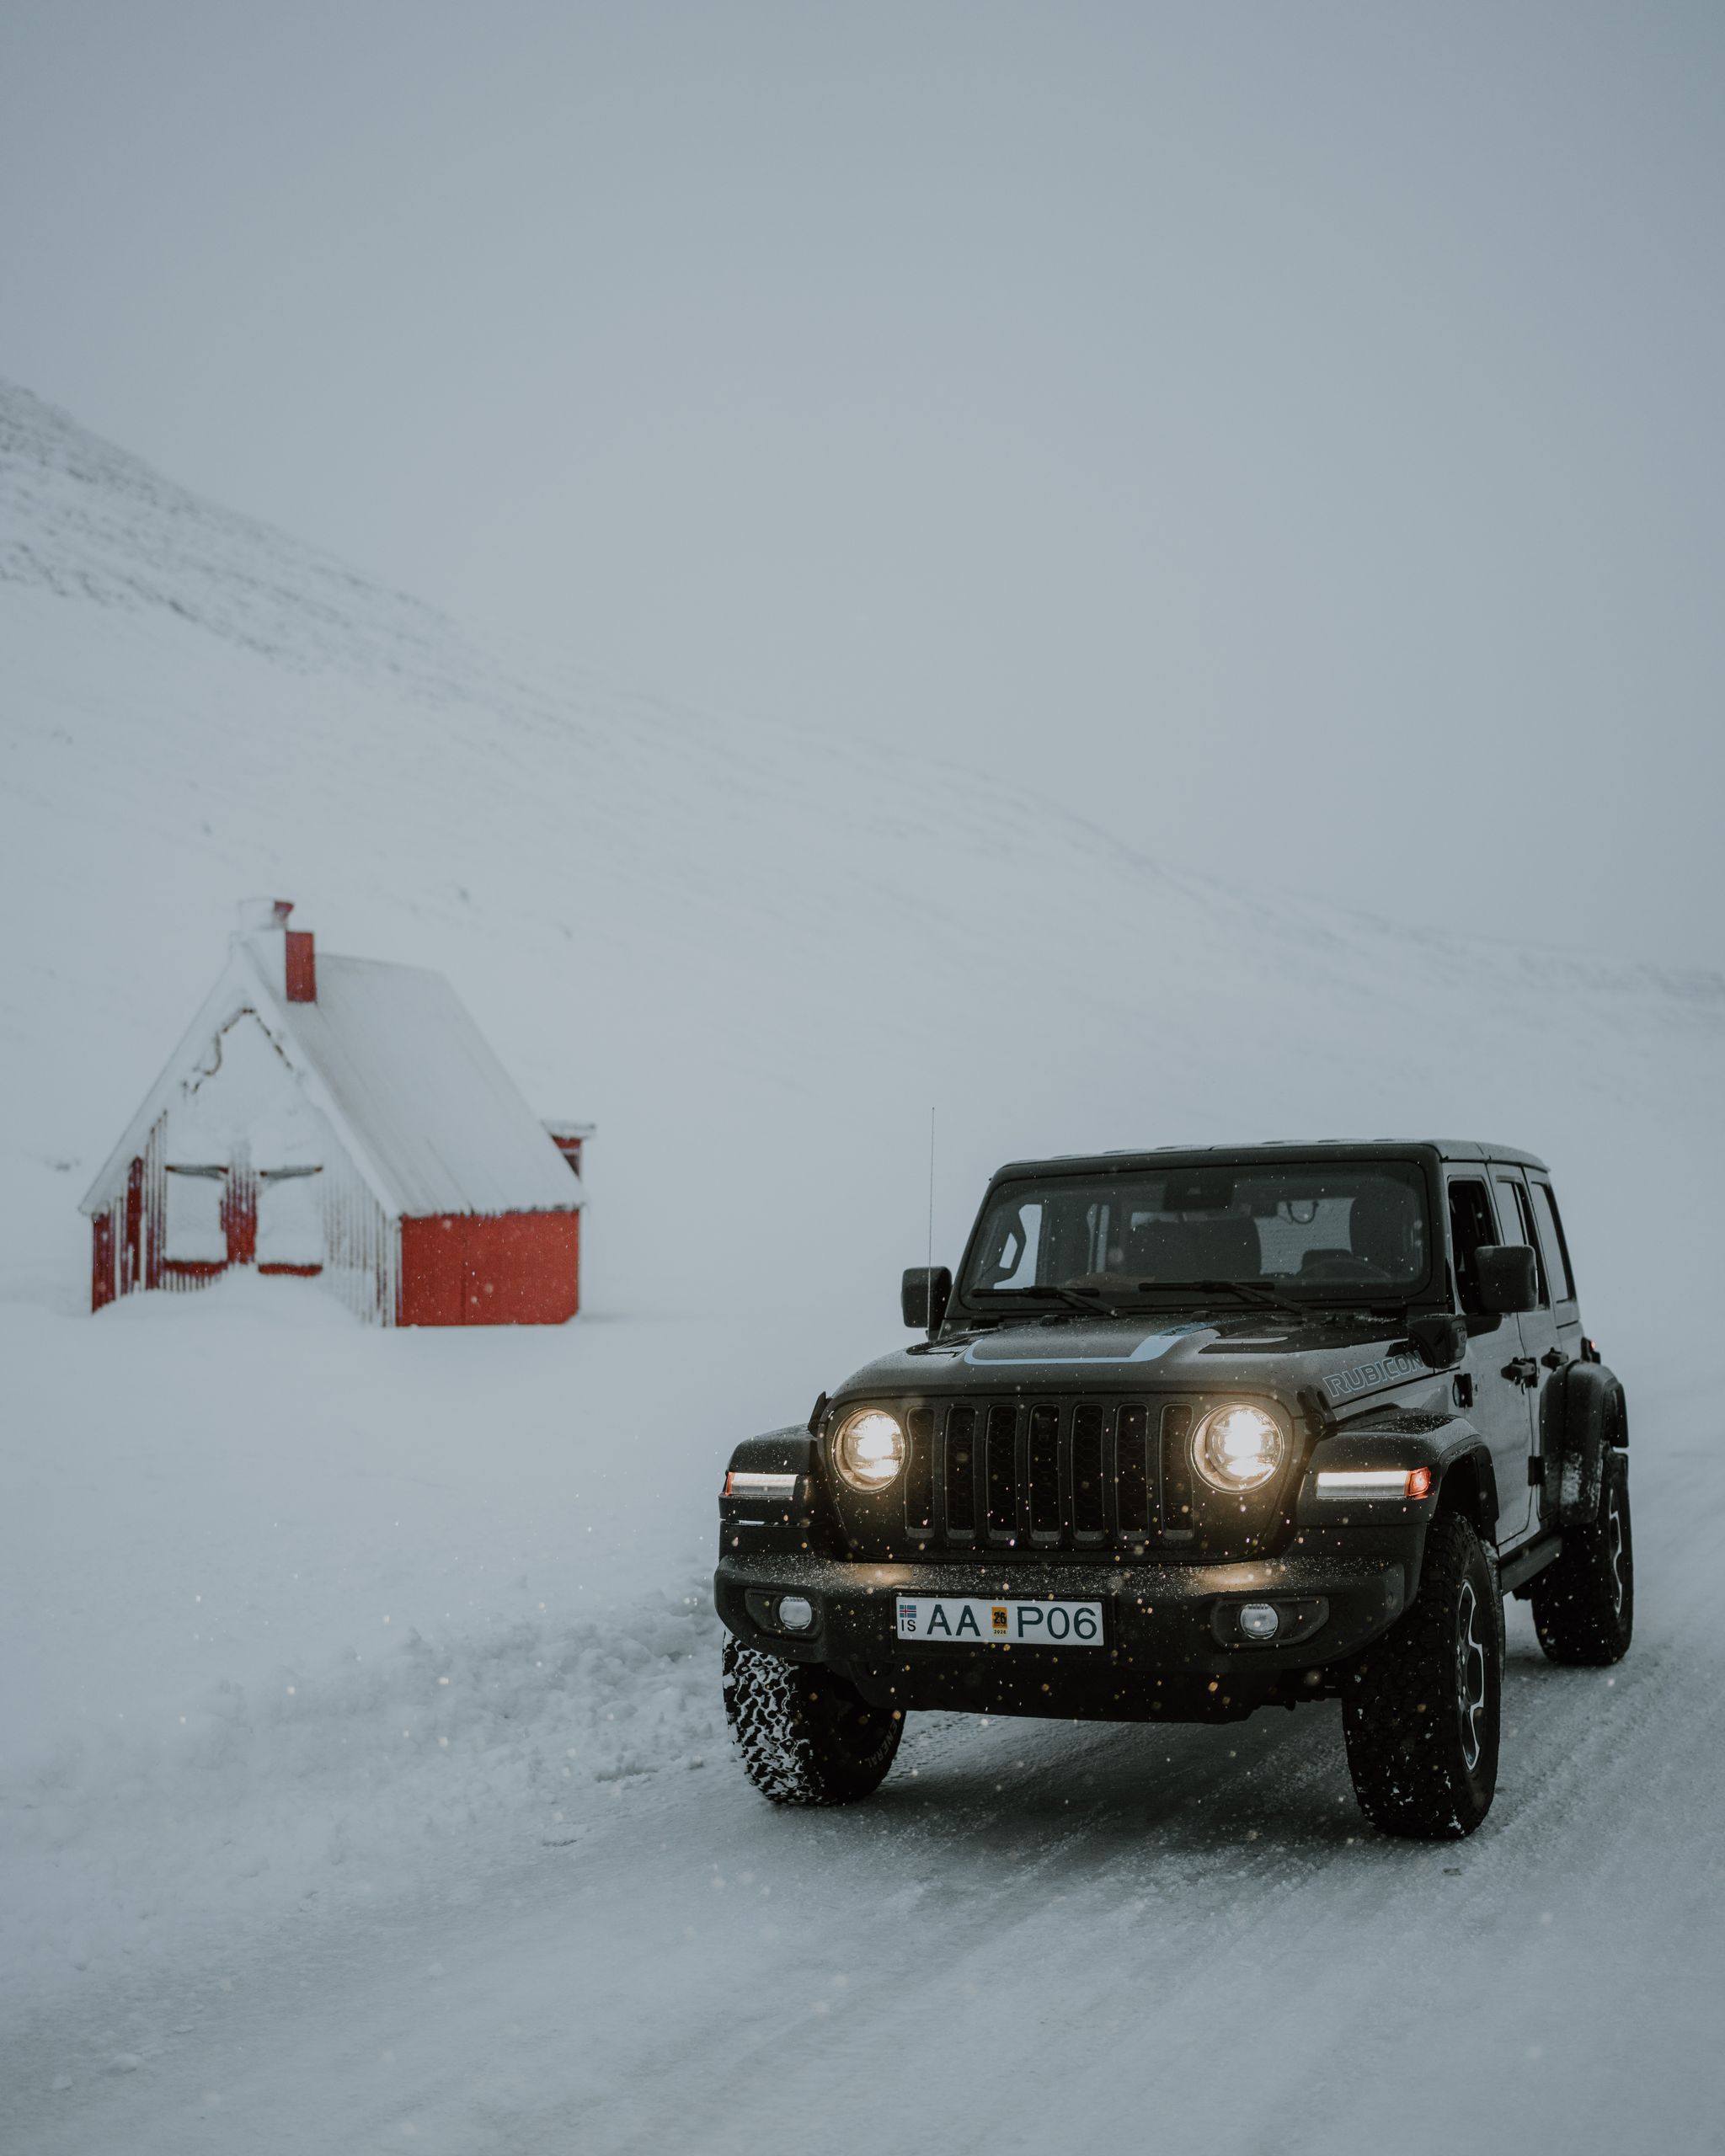 A view of a car driving on a road in Iceland during winter